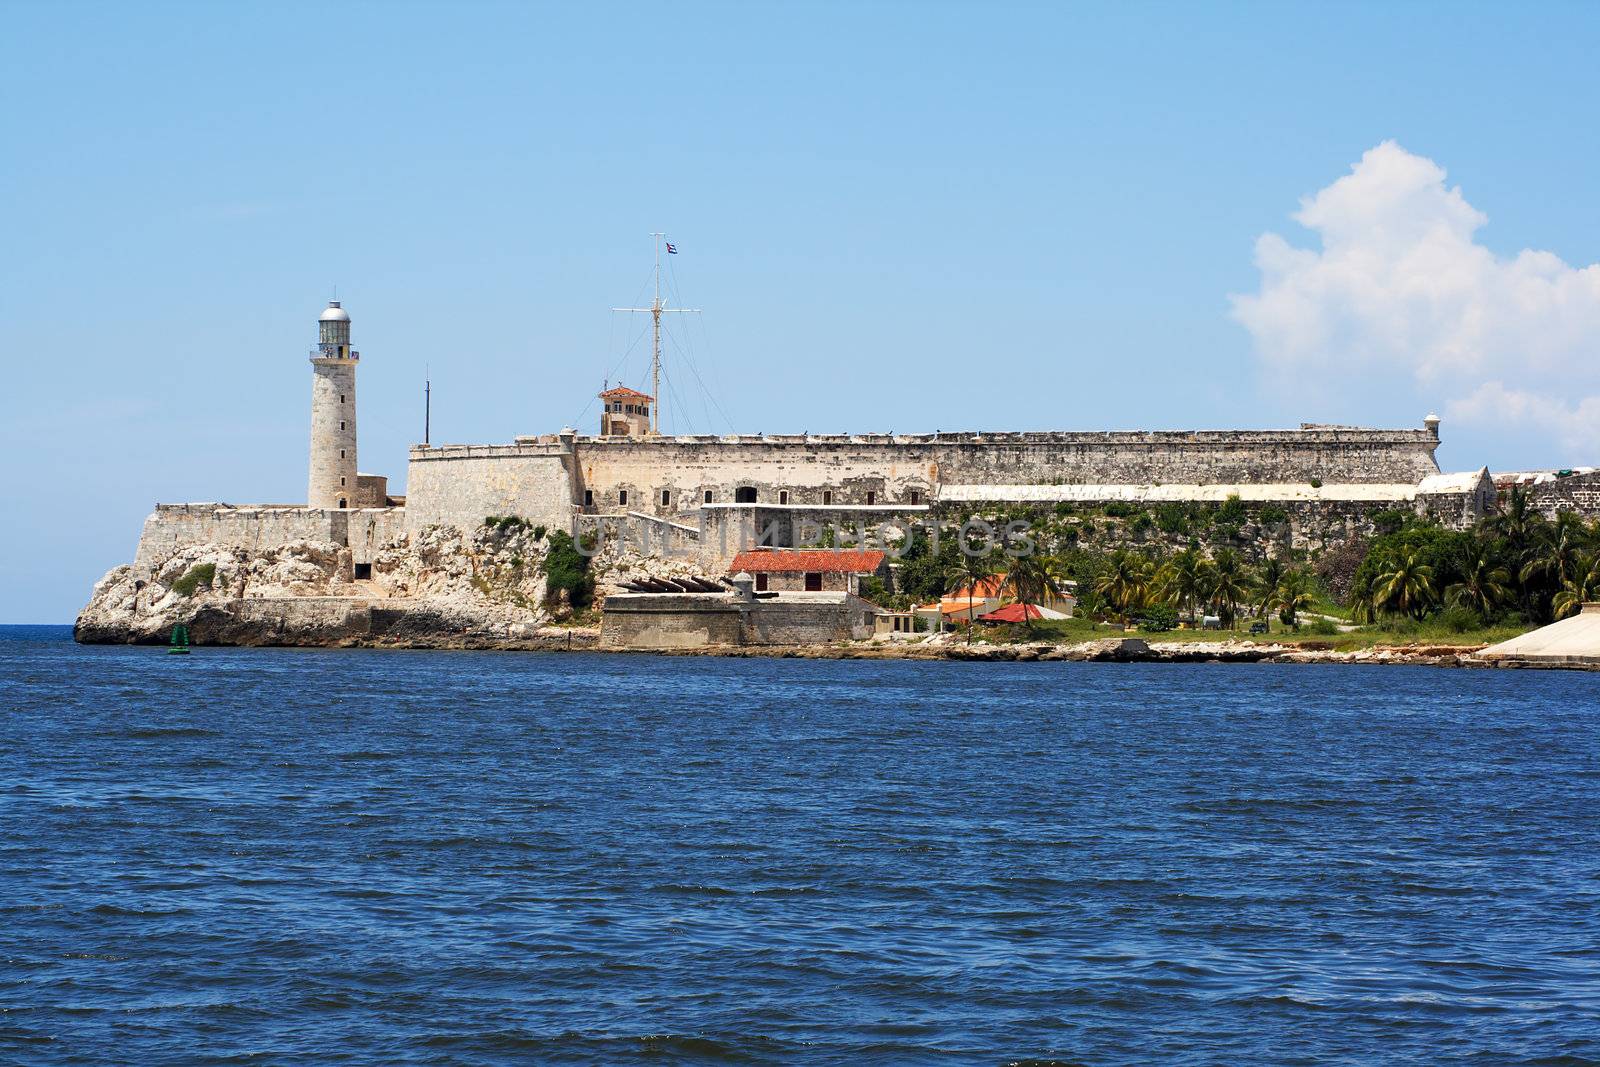 The colonial "El Morro" castle in the entrance of the bay of Havana